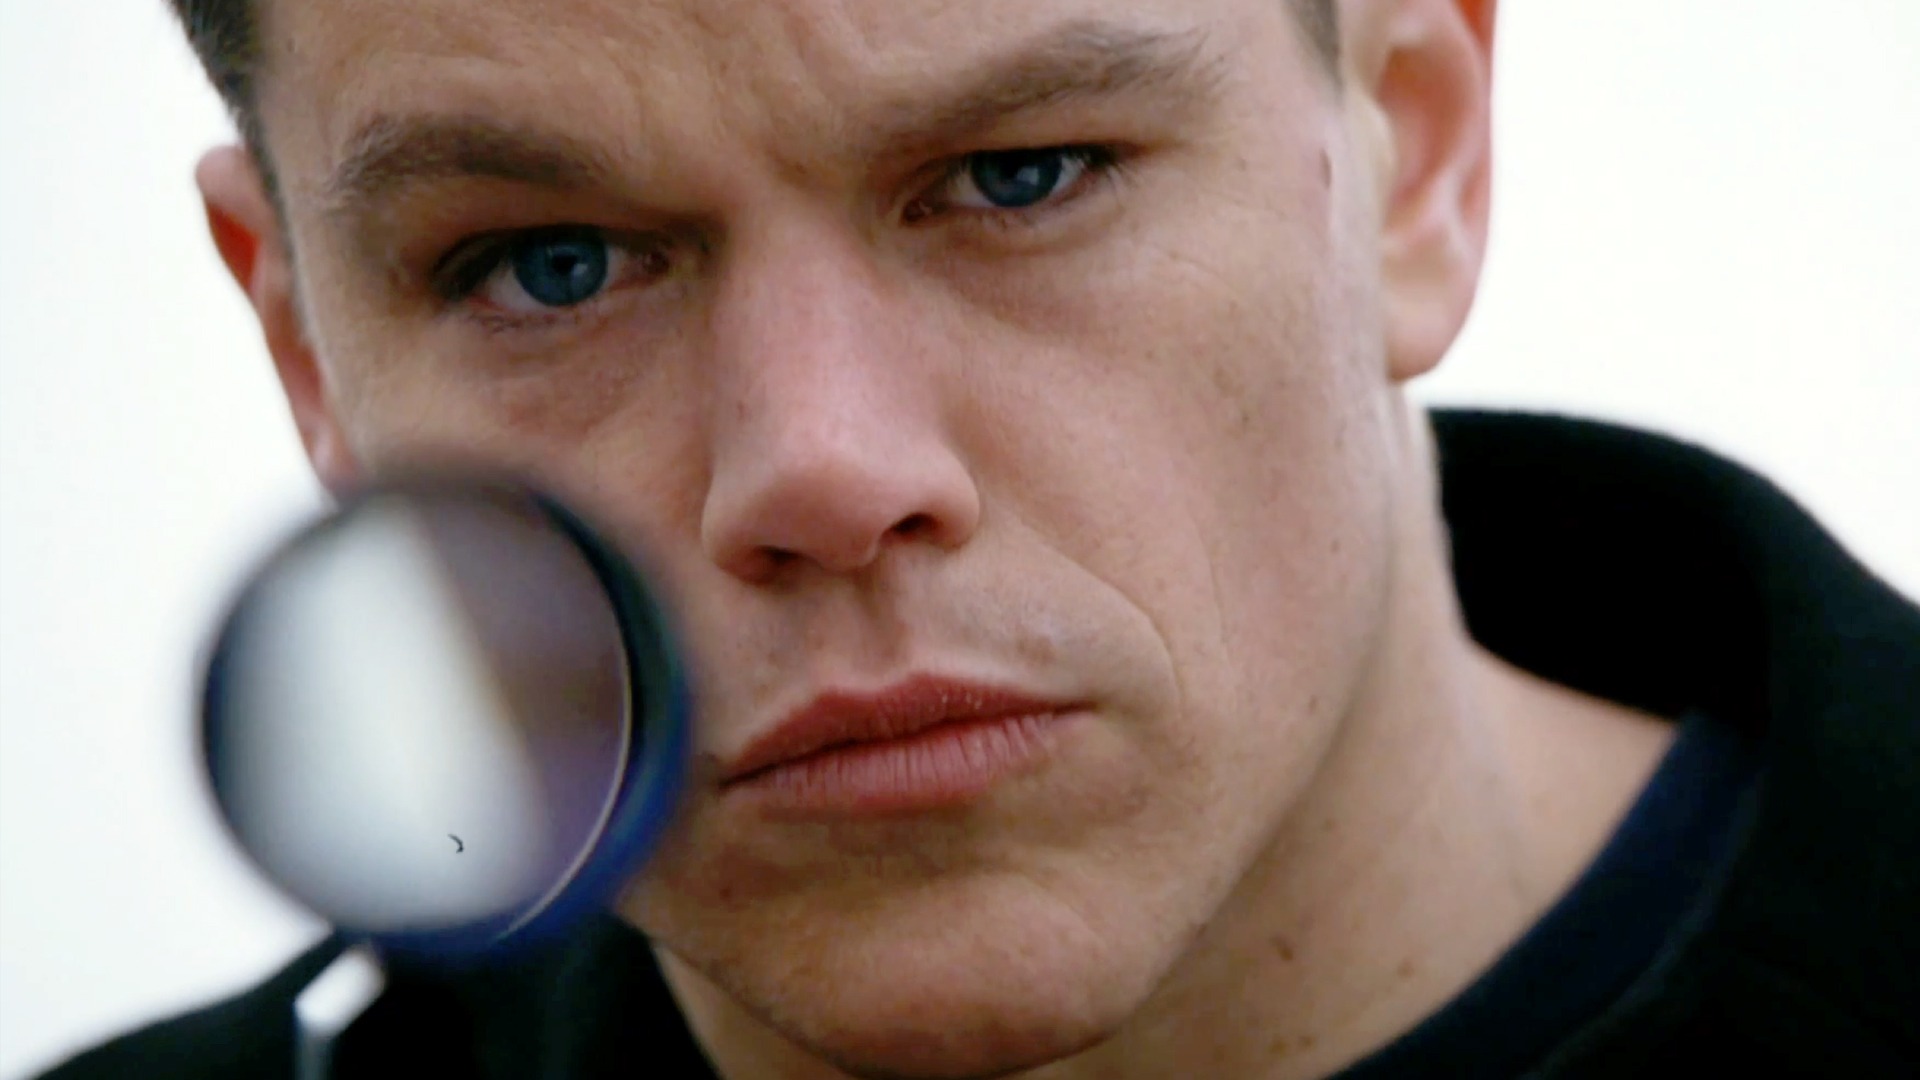 Matt Damon as Jason Bourne looks directly into the camera while holding a sniper rifle in “The Bourne Supremacy”.